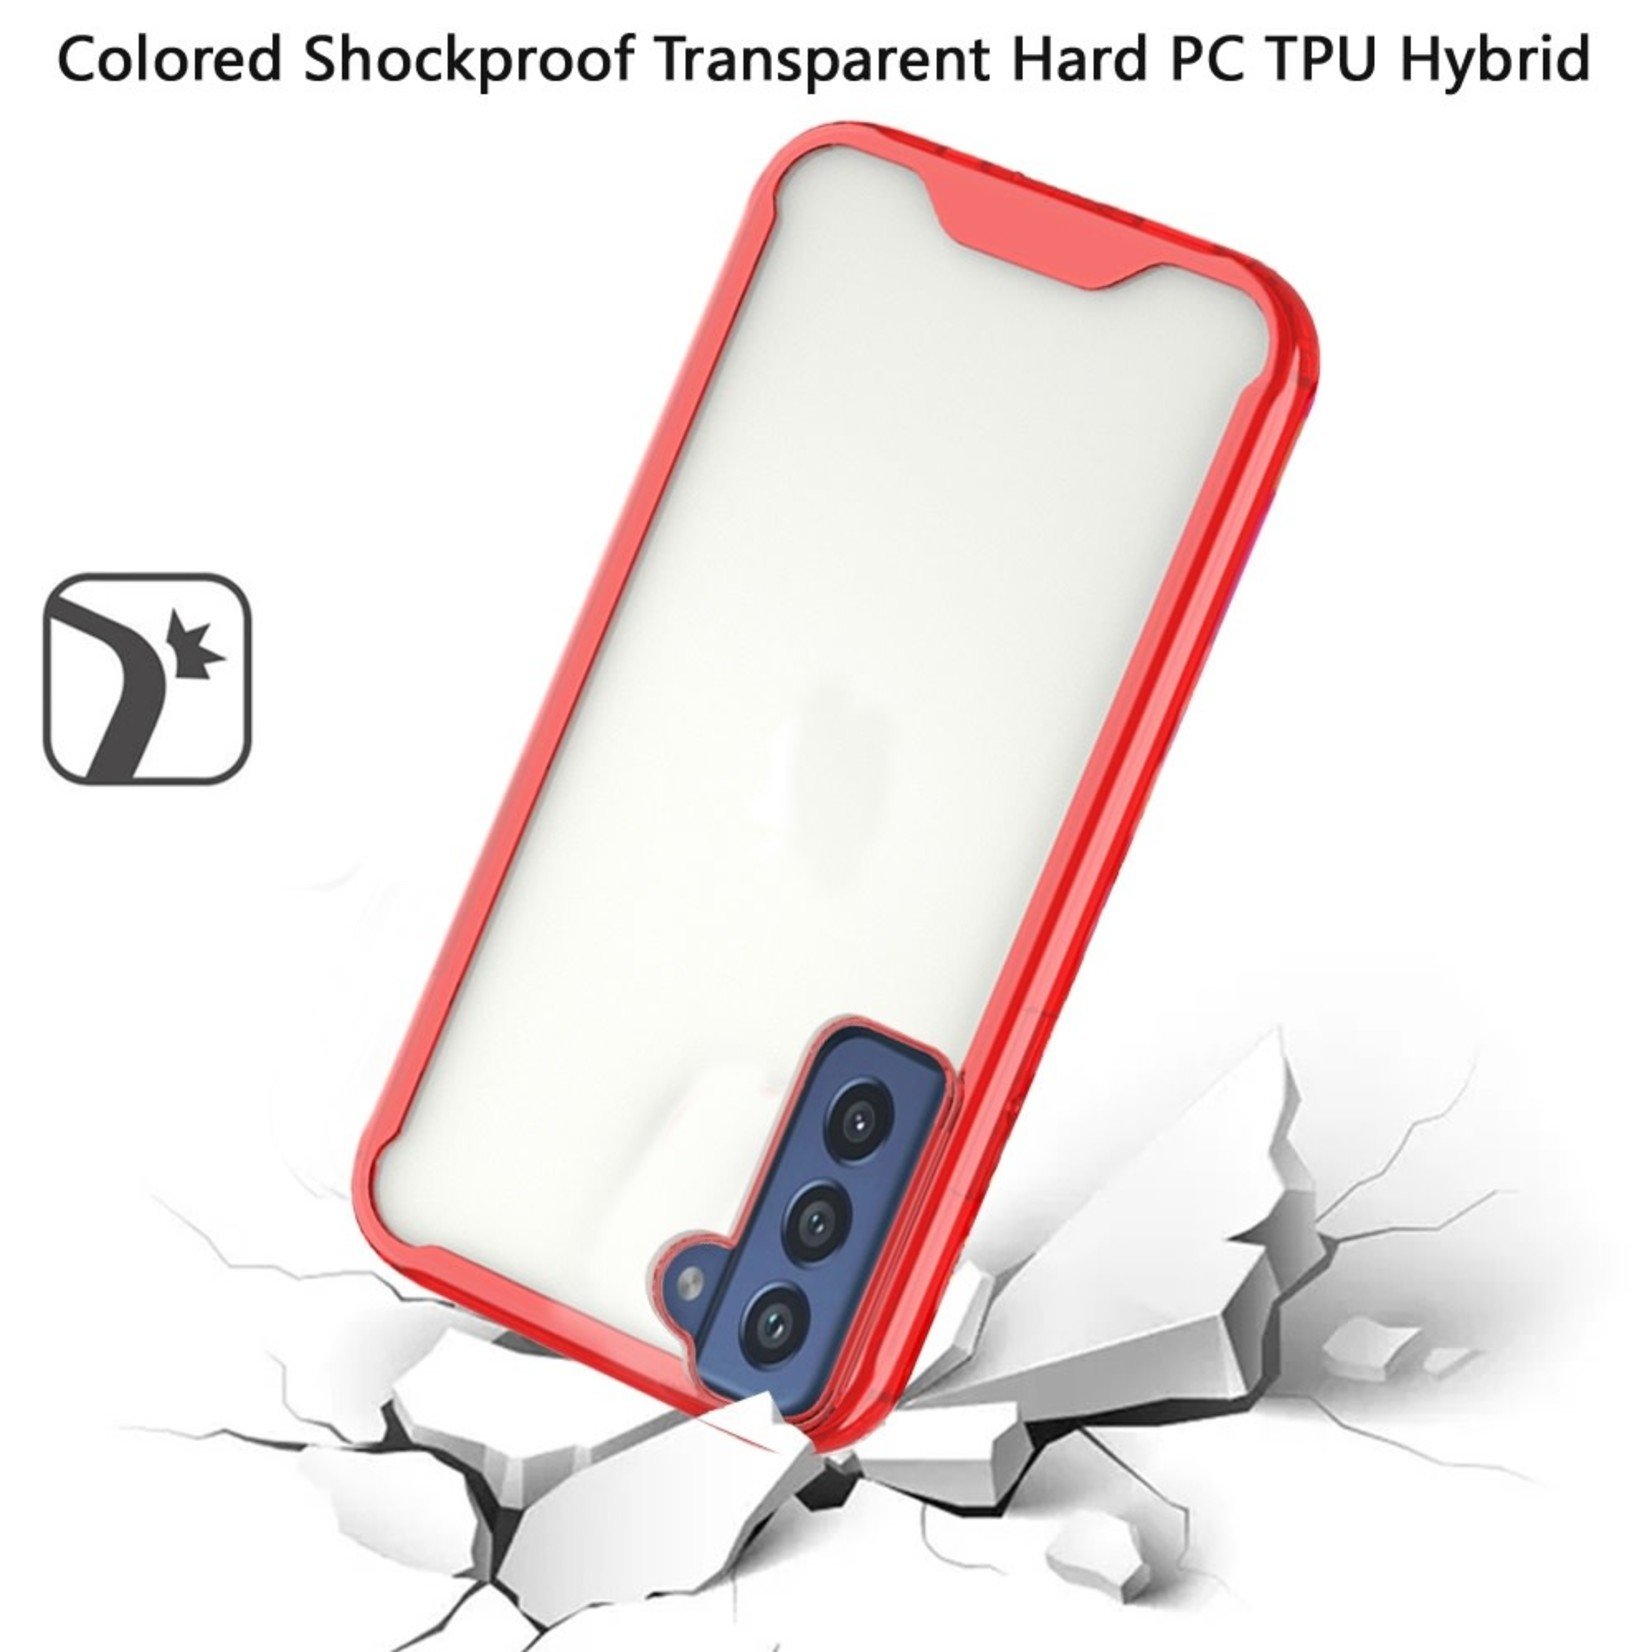 Samsung Colored Shockproof Transparent Hard PC TPU Hybrid Case Cover - Clear/Red For Samsung Galaxy S22 Plus